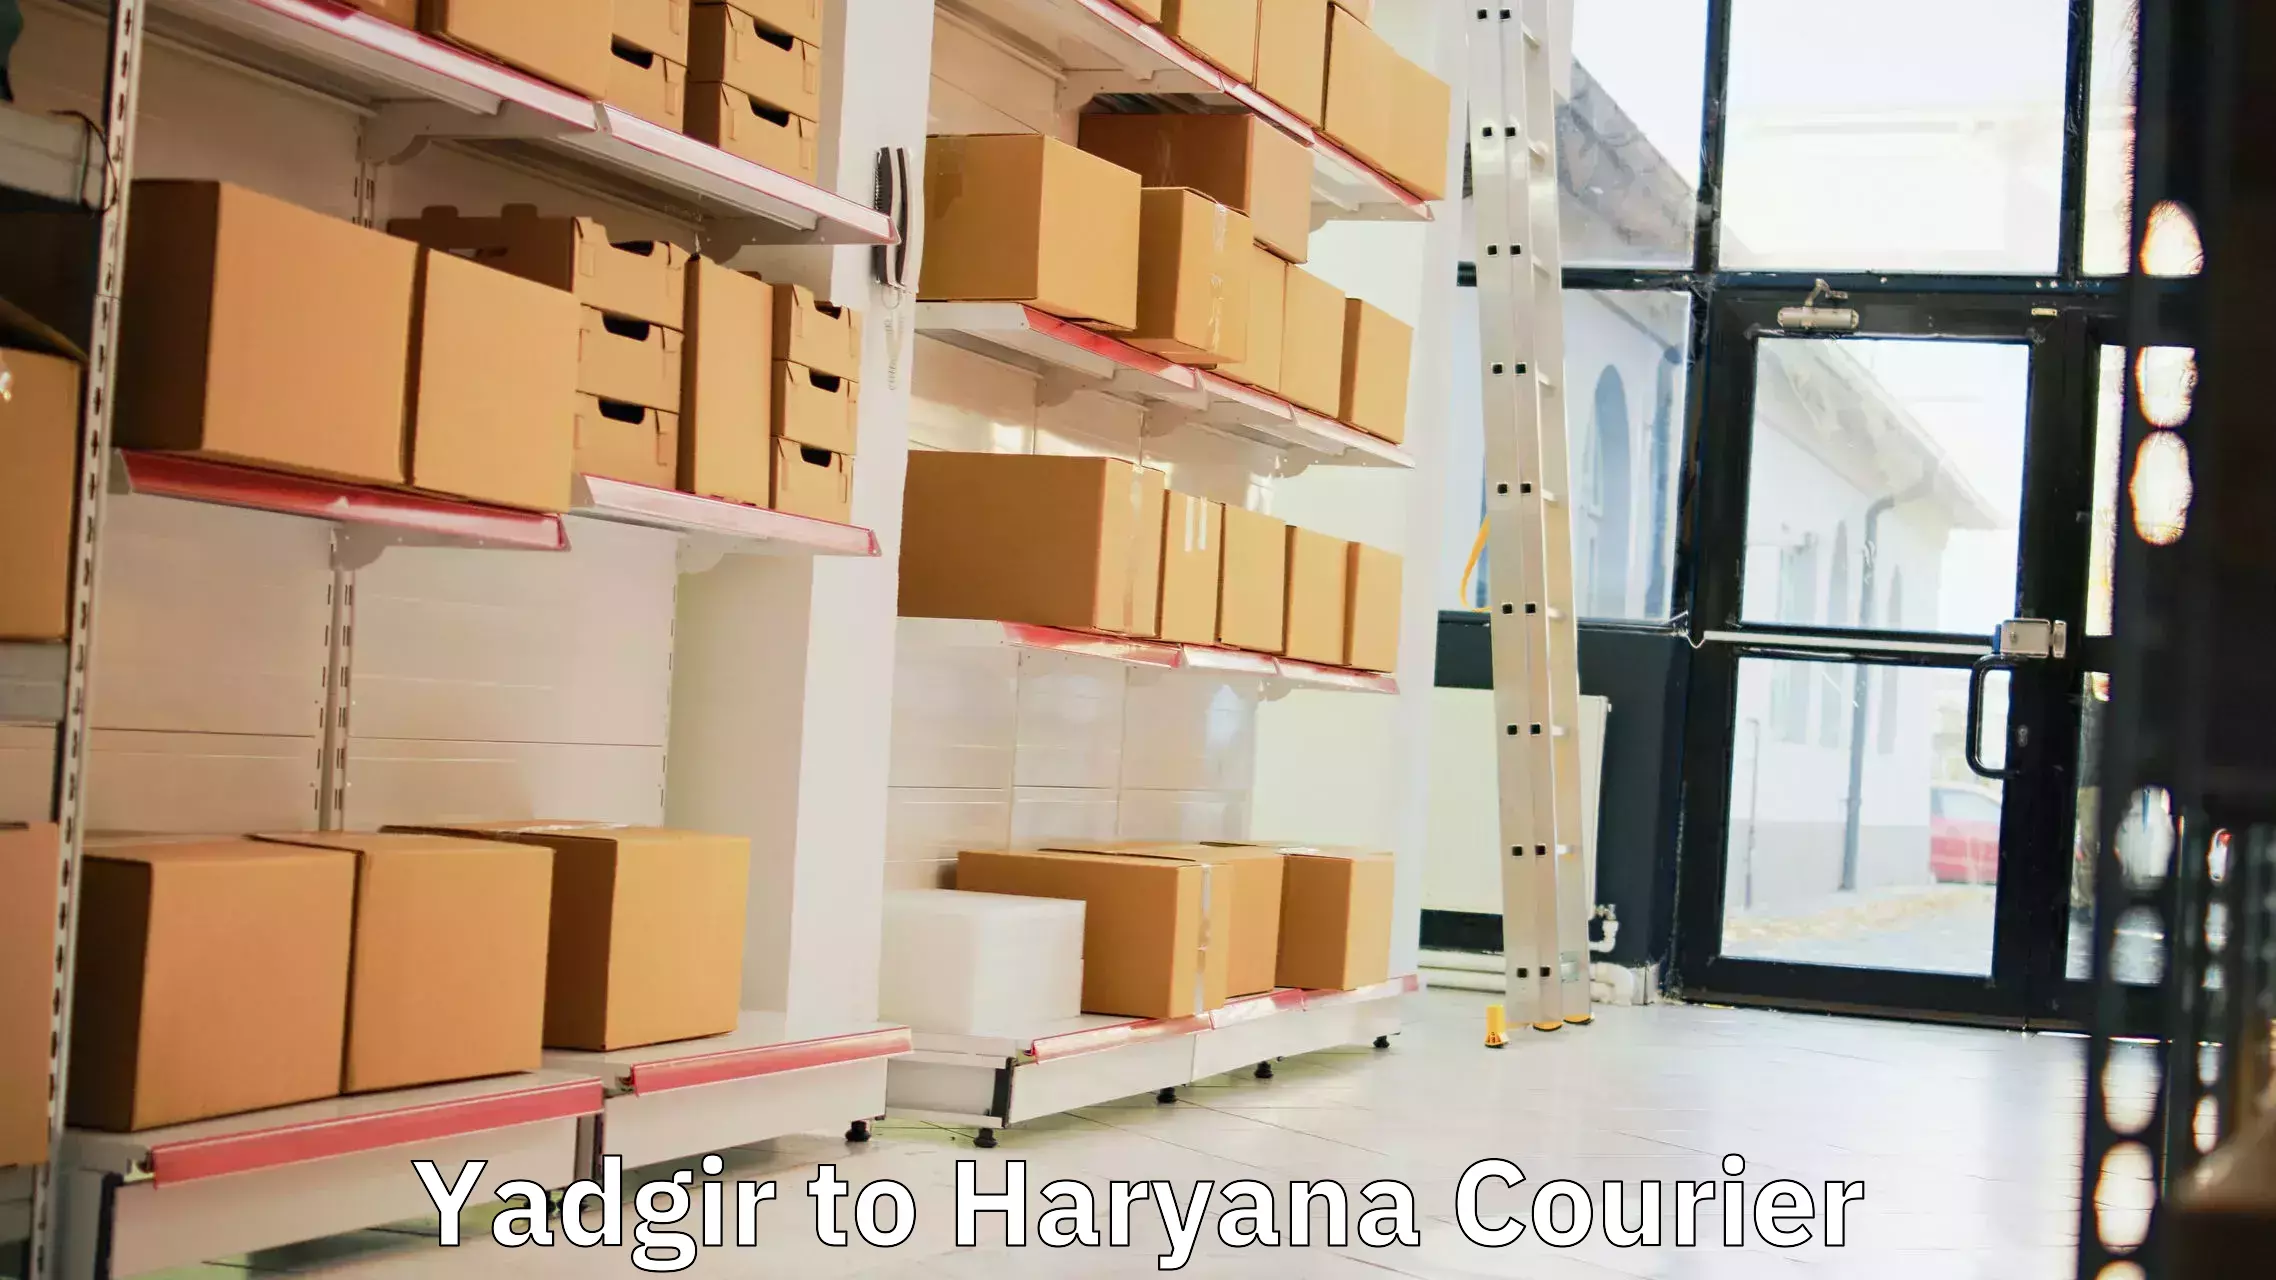 Courier service booking Yadgir to Agroha